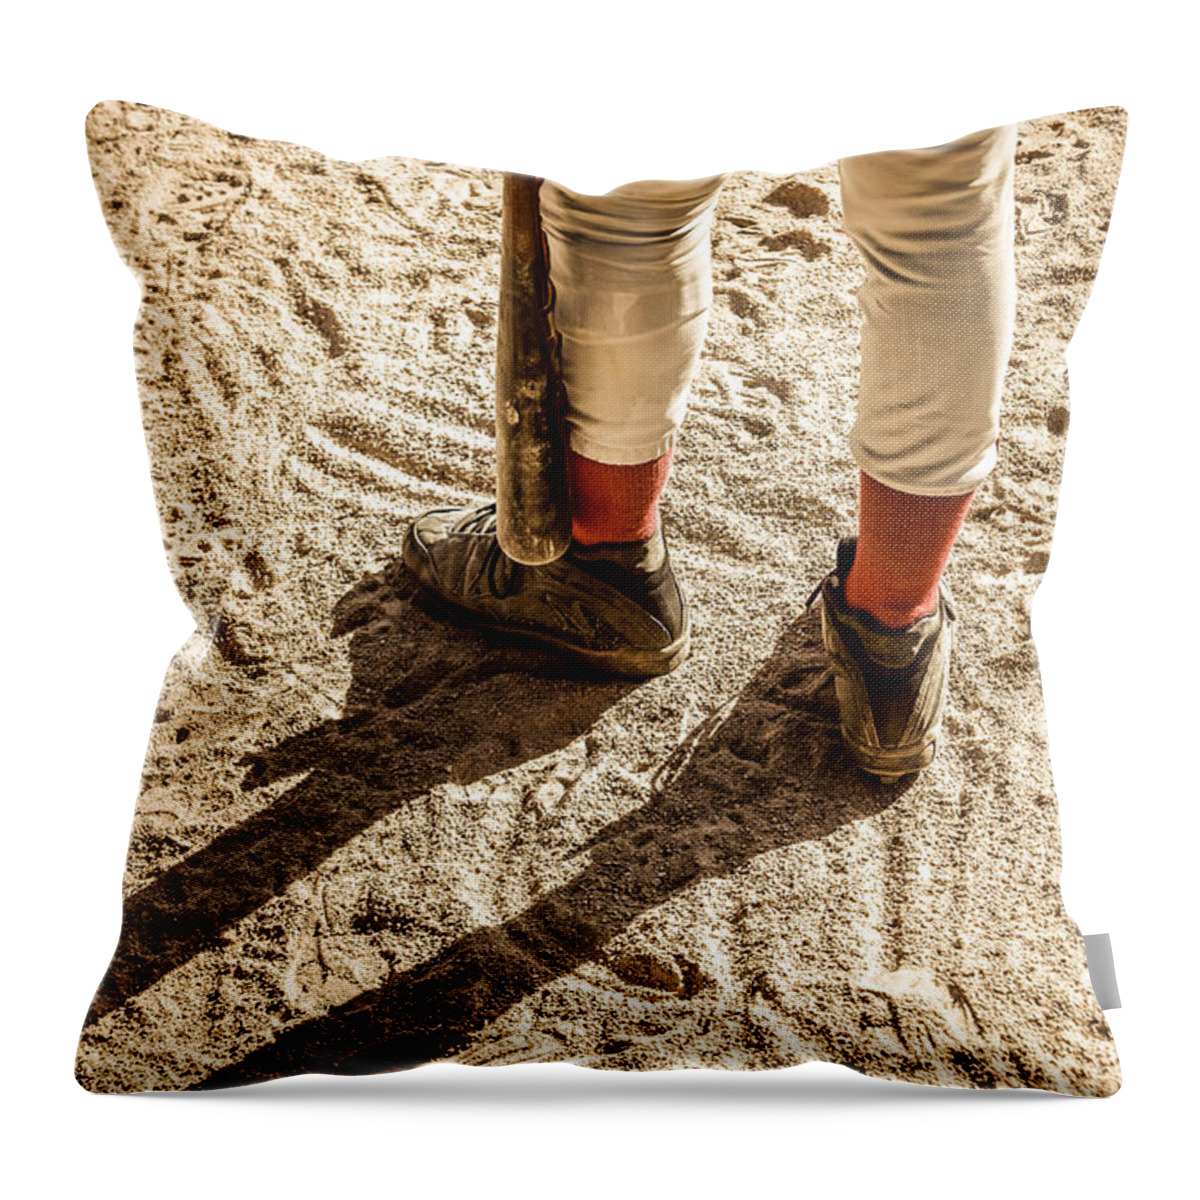 Baseball Throw Pillow featuring the photograph On Deck by Diane Diederich